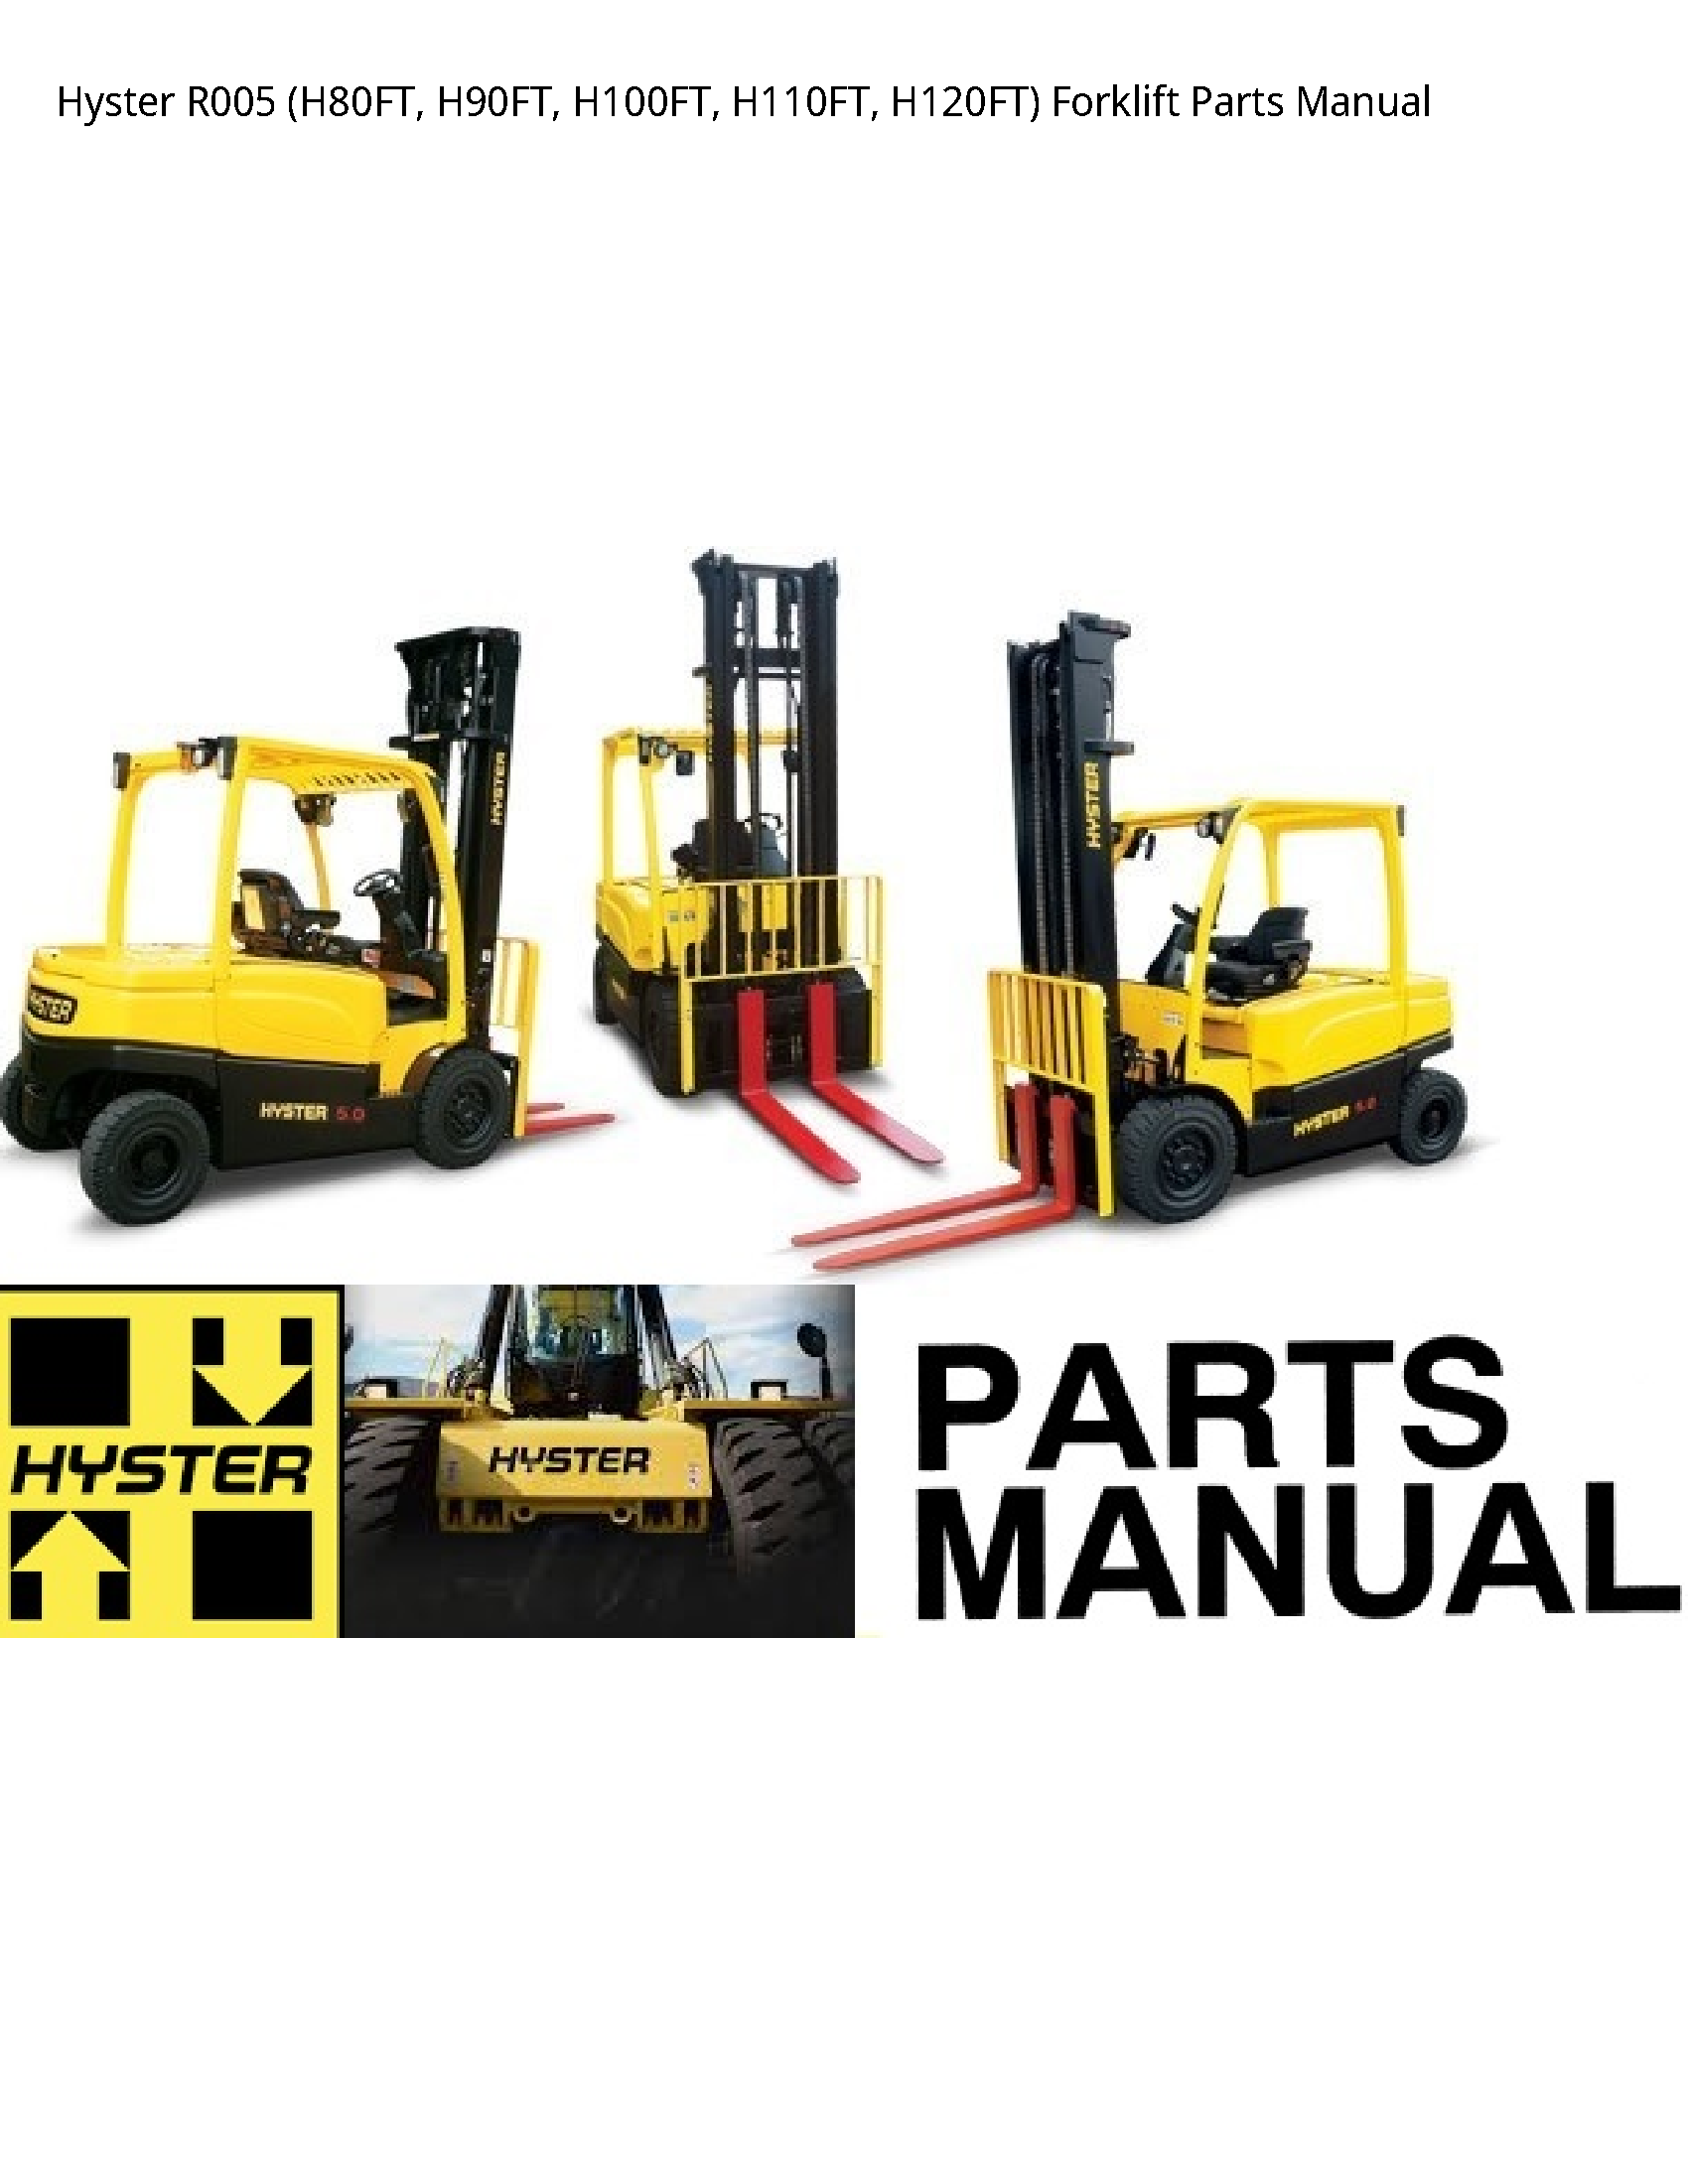 Hyster R005 Forklift Parts manual